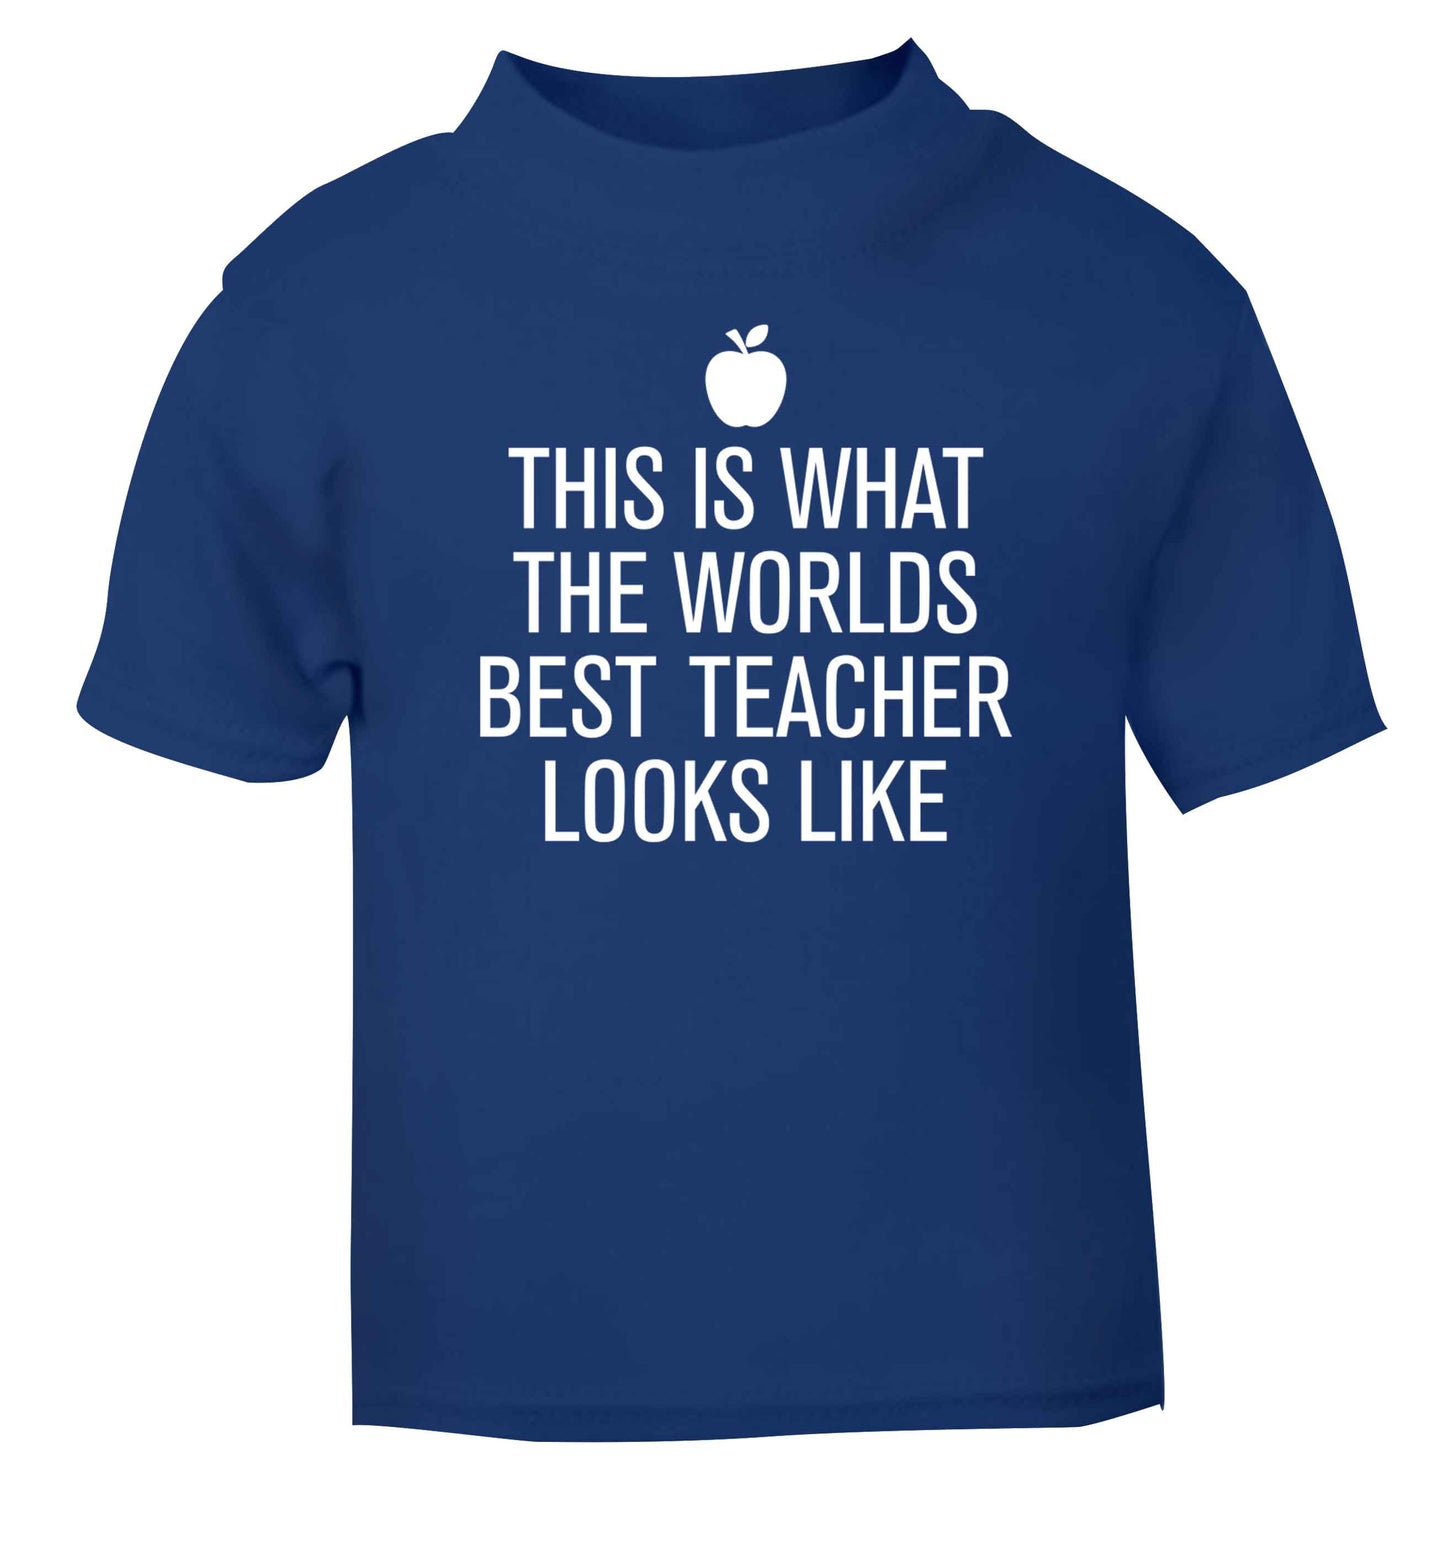 This is what the worlds best teacher looks like blue baby toddler Tshirt 2 Years